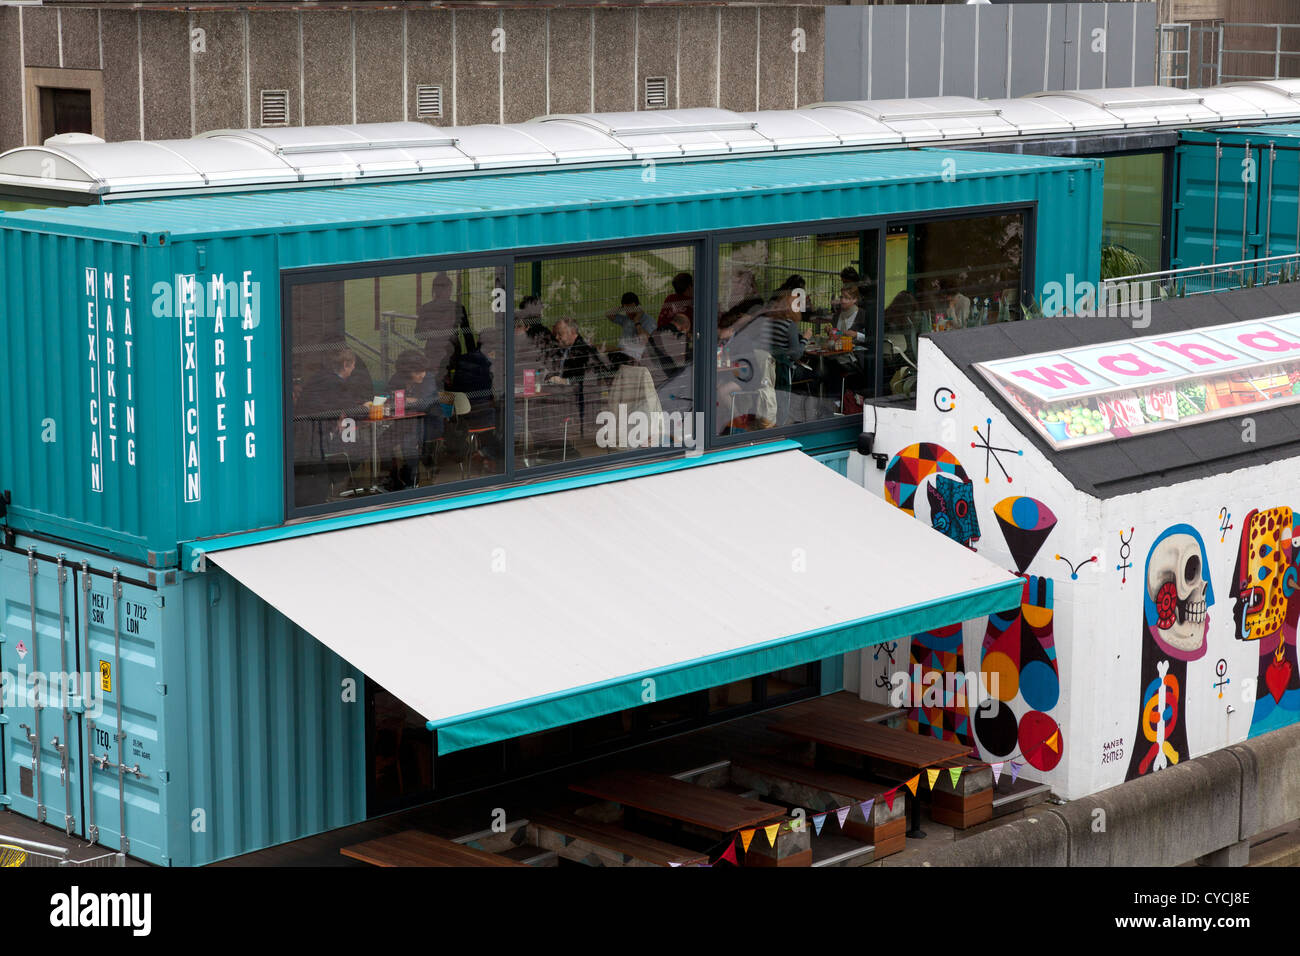 https://c8.alamy.com/comp/CYCJ8E/wahaca-mexican-restaurant-on-londons-south-bank-constructed-from-recycled-CYCJ8E.jpg